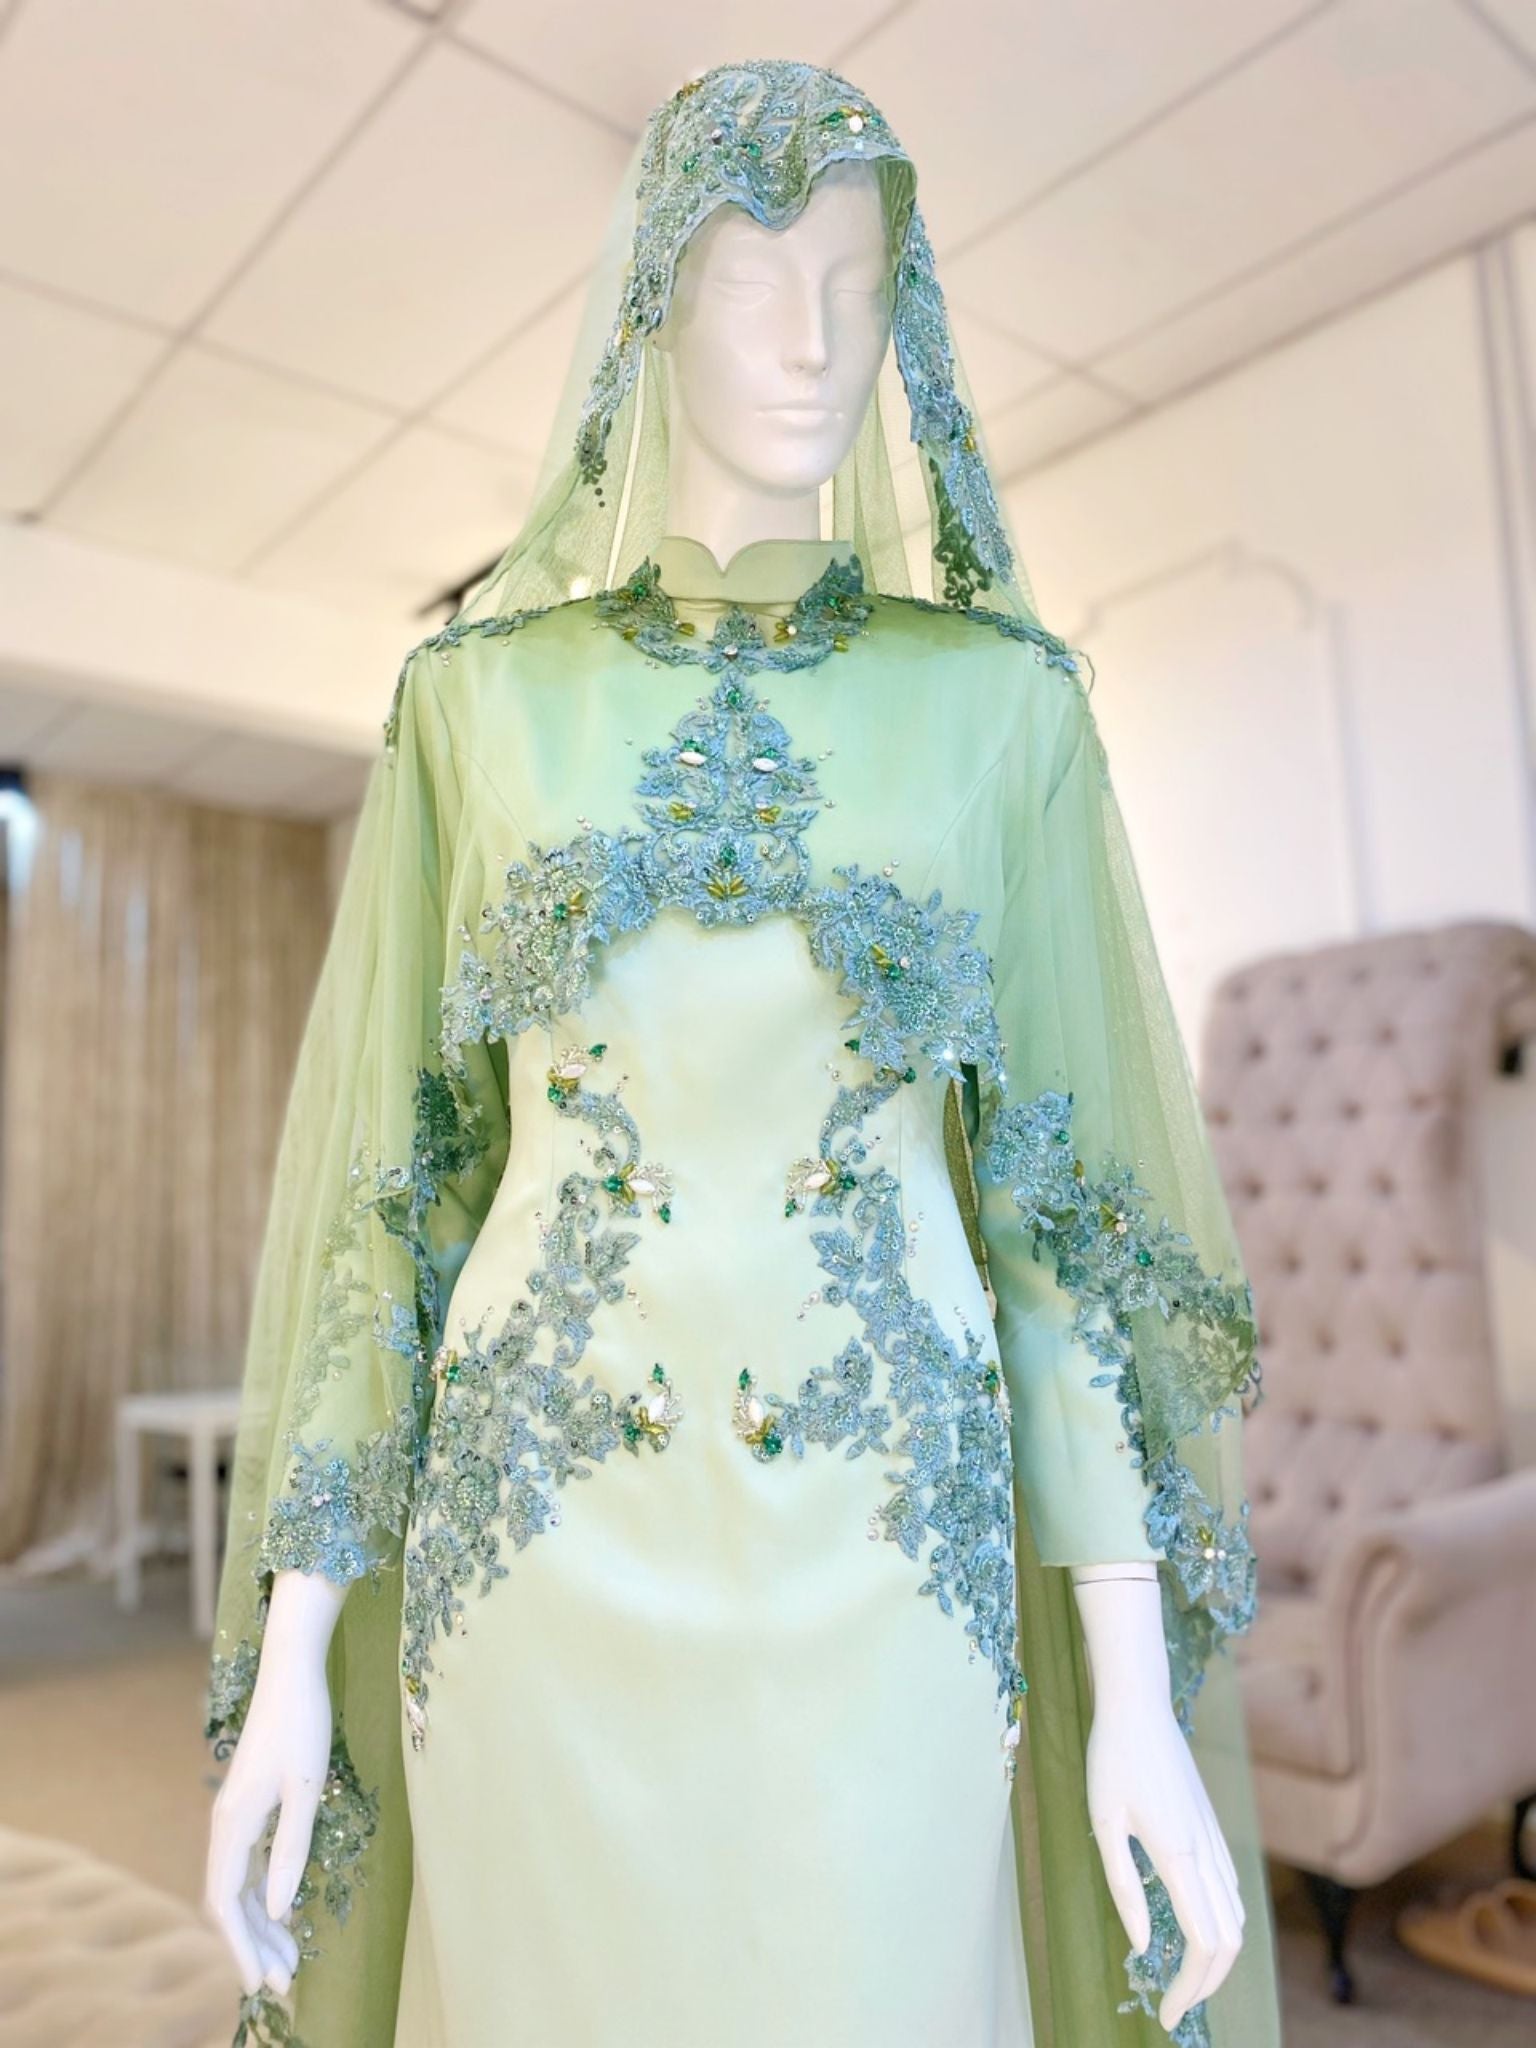 Hajar is an elegant olive green double face wedding dress with a detachable cape that is perfect for the modern bride. With its unique design and flattering fit, Hajar is sure to turn heads on your big day. Made from luxurious double face fabric, this dress is the perfect way to celebrate your special day in style.